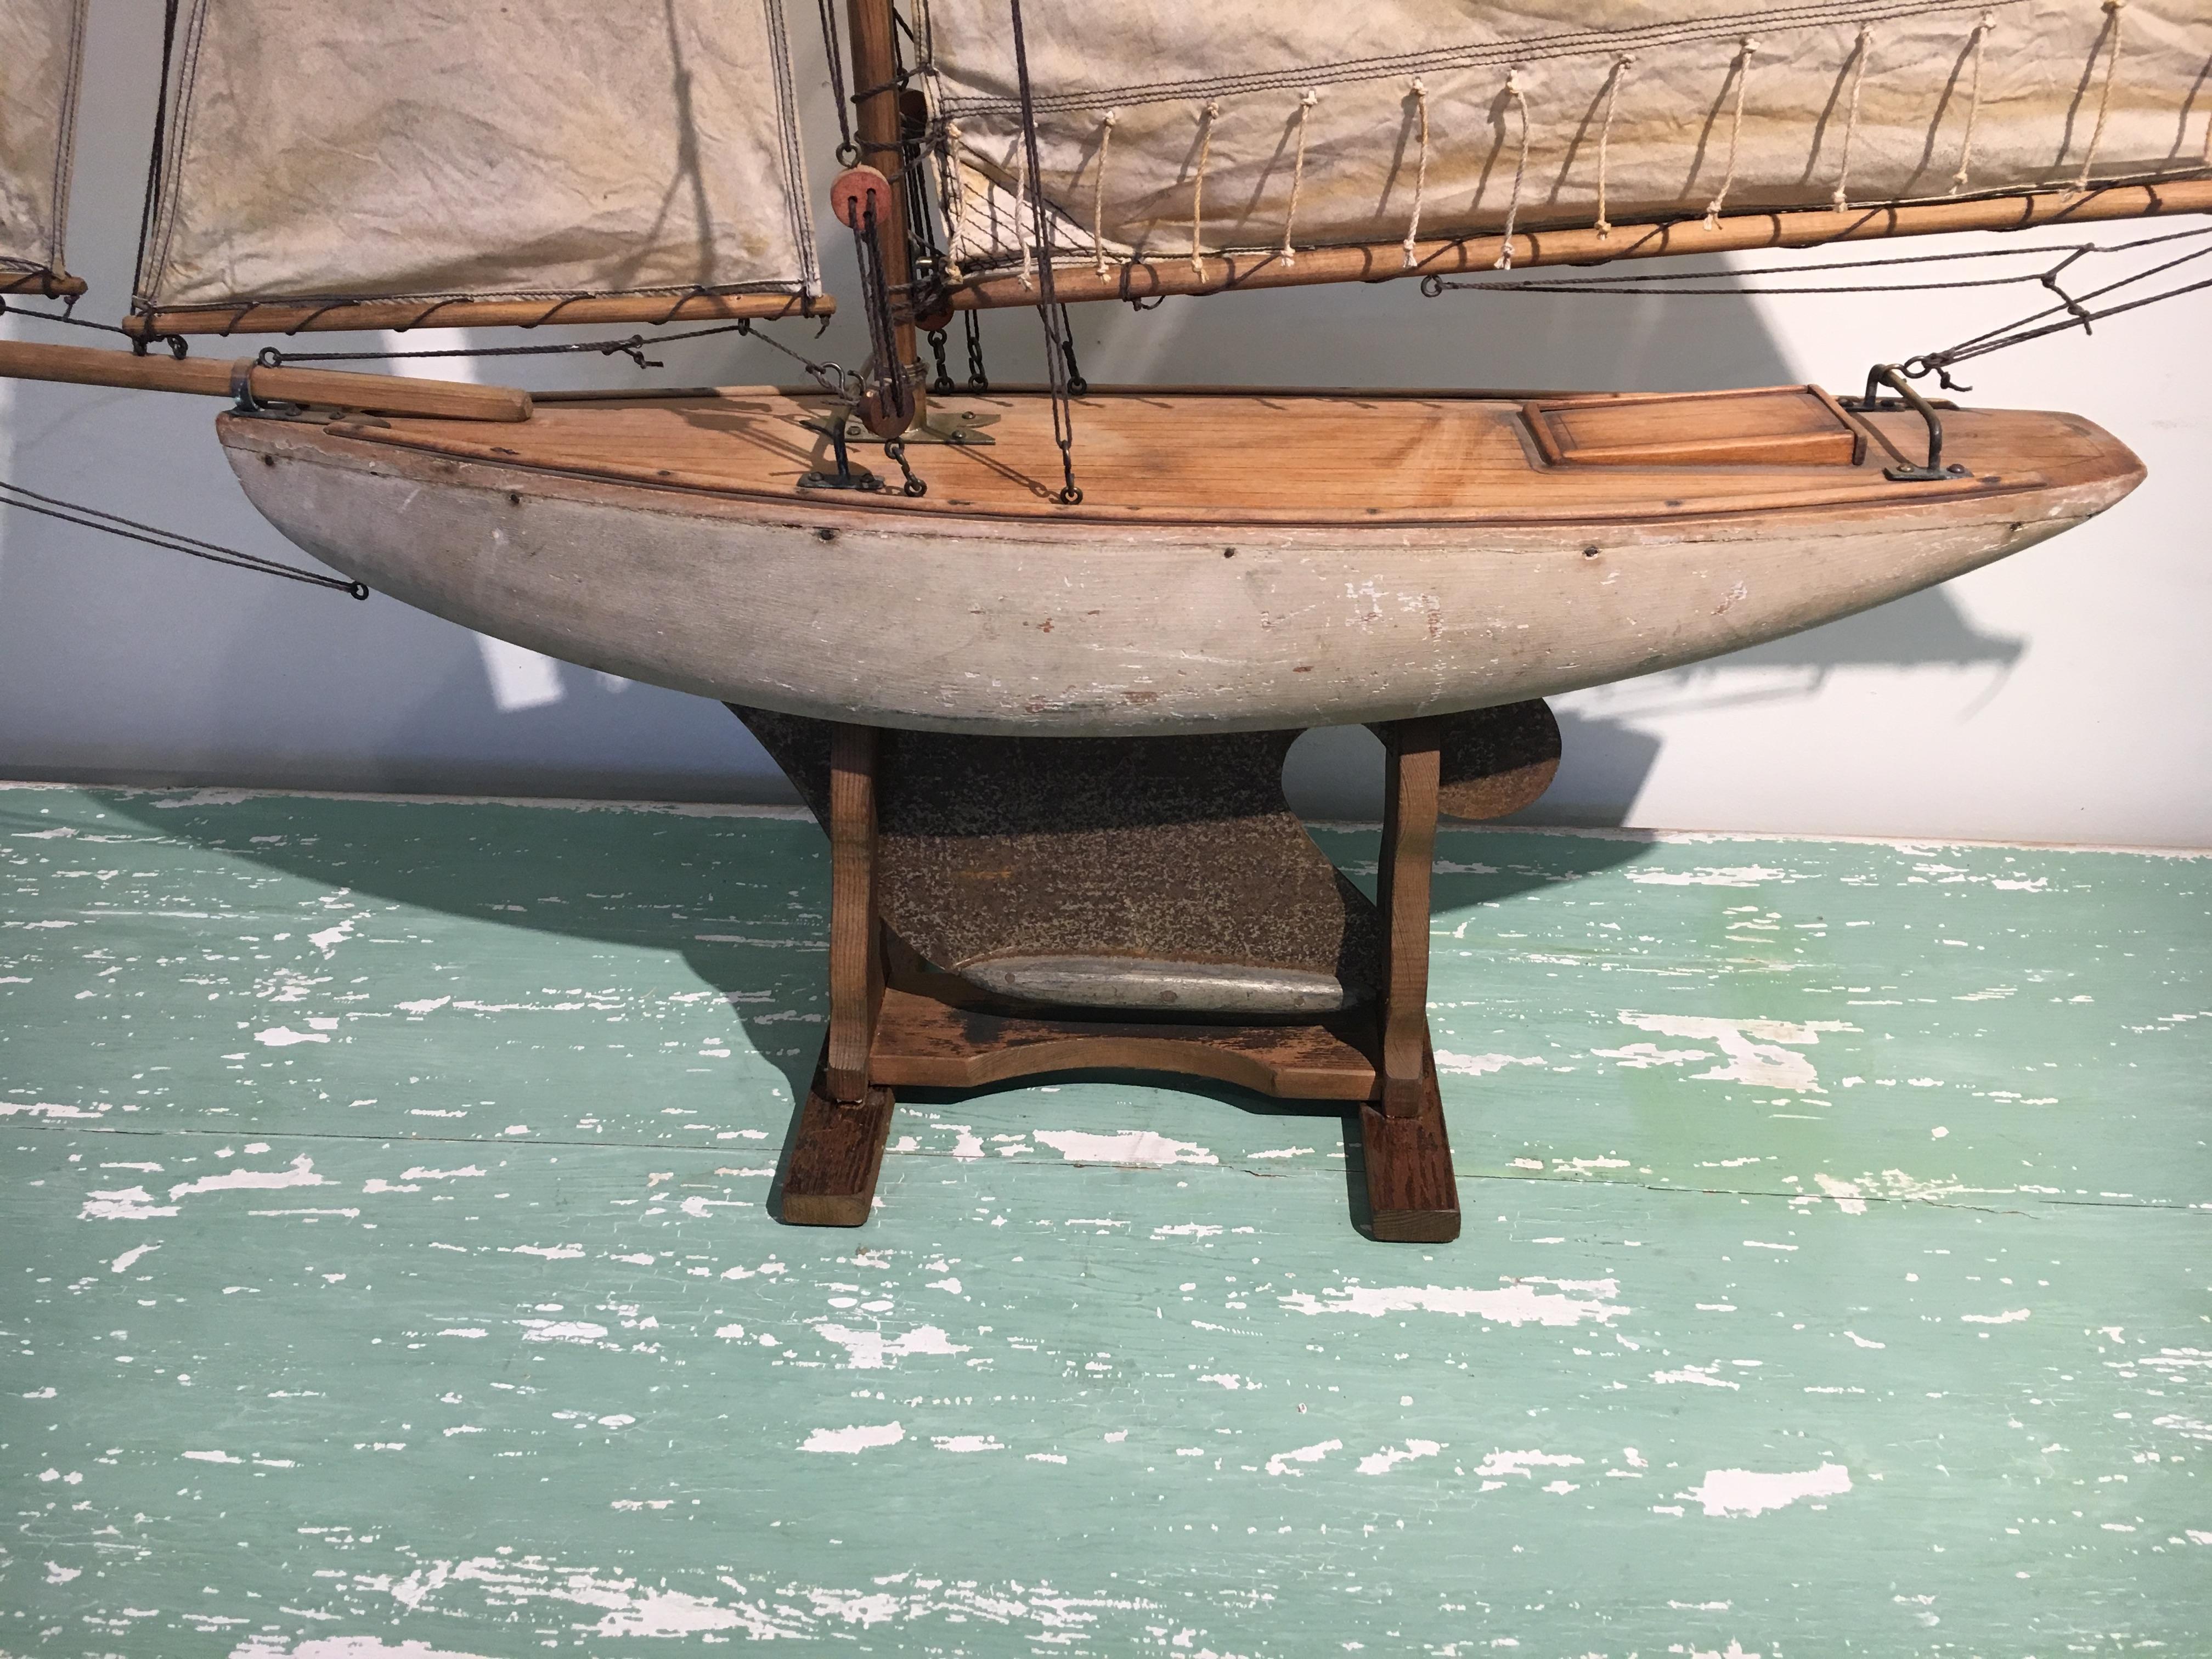 These pond yachts were actually used in the 1936 Olympics and are used for racing in the UK. Original sails and riggings and the stand is original to the piece. The measurements include the stand.